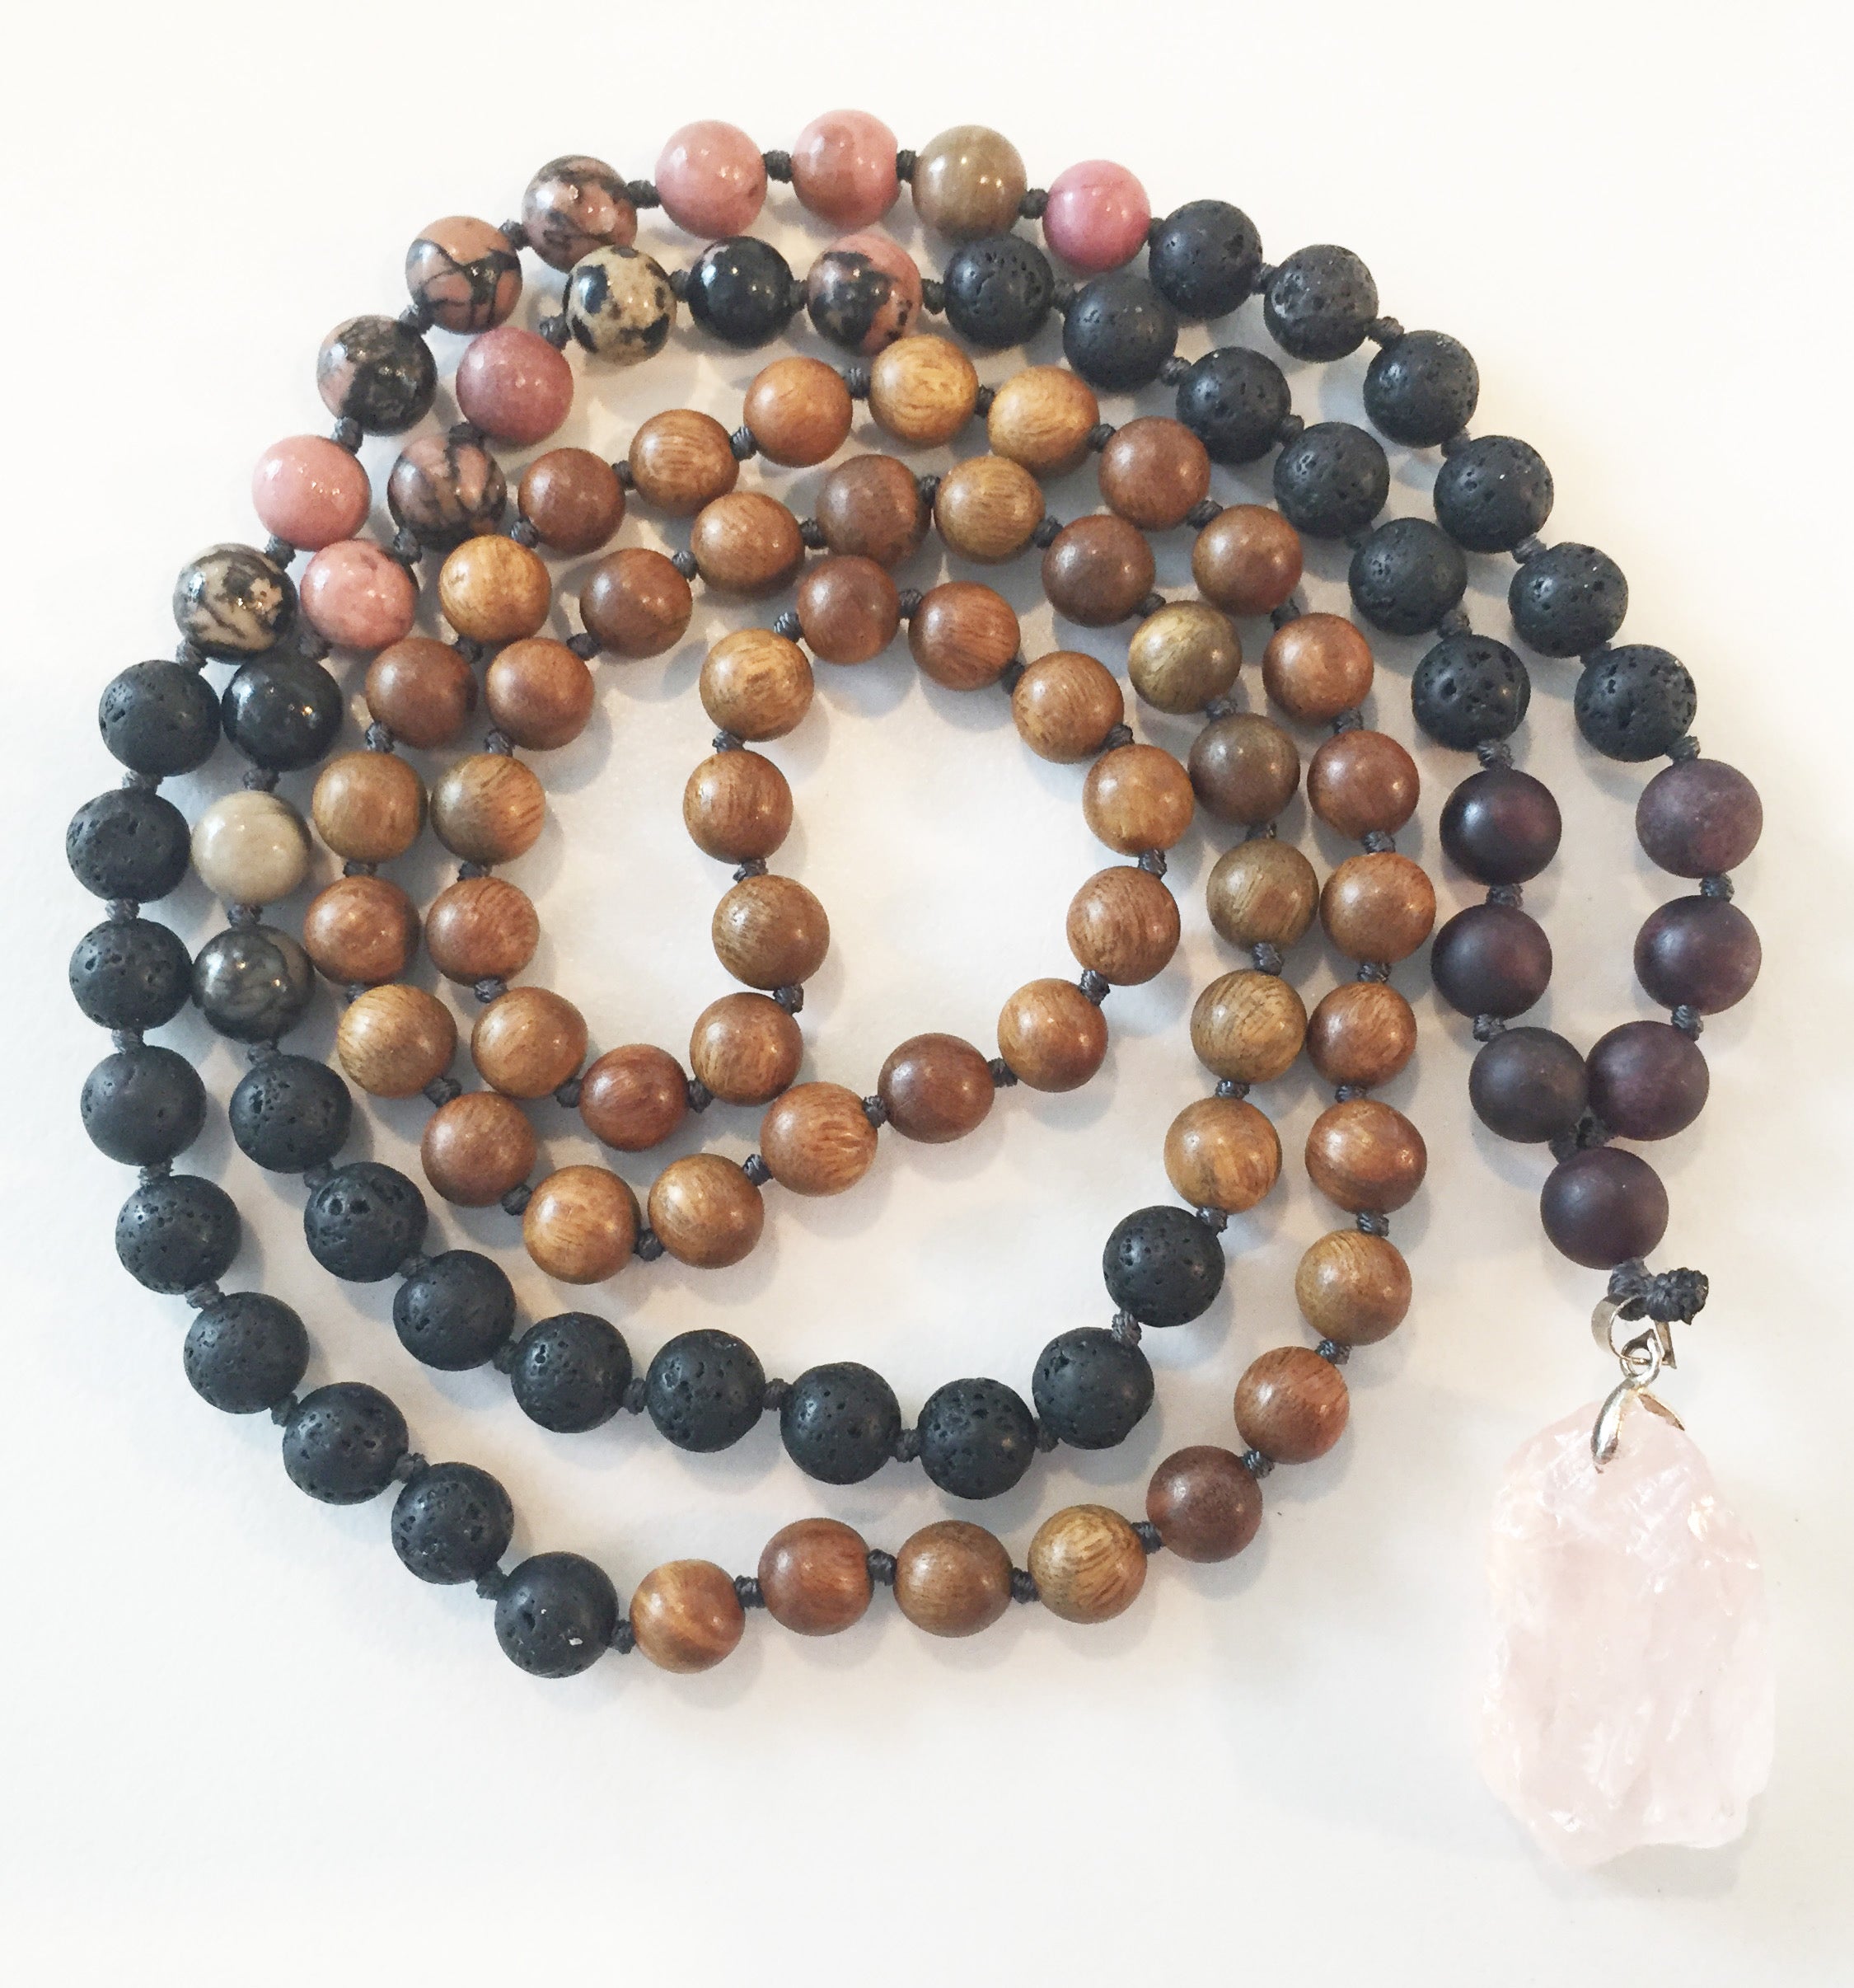 8mm Green Sandalwood & Rhodonite 108 Knotted Mala Necklace with Crystal Pendant